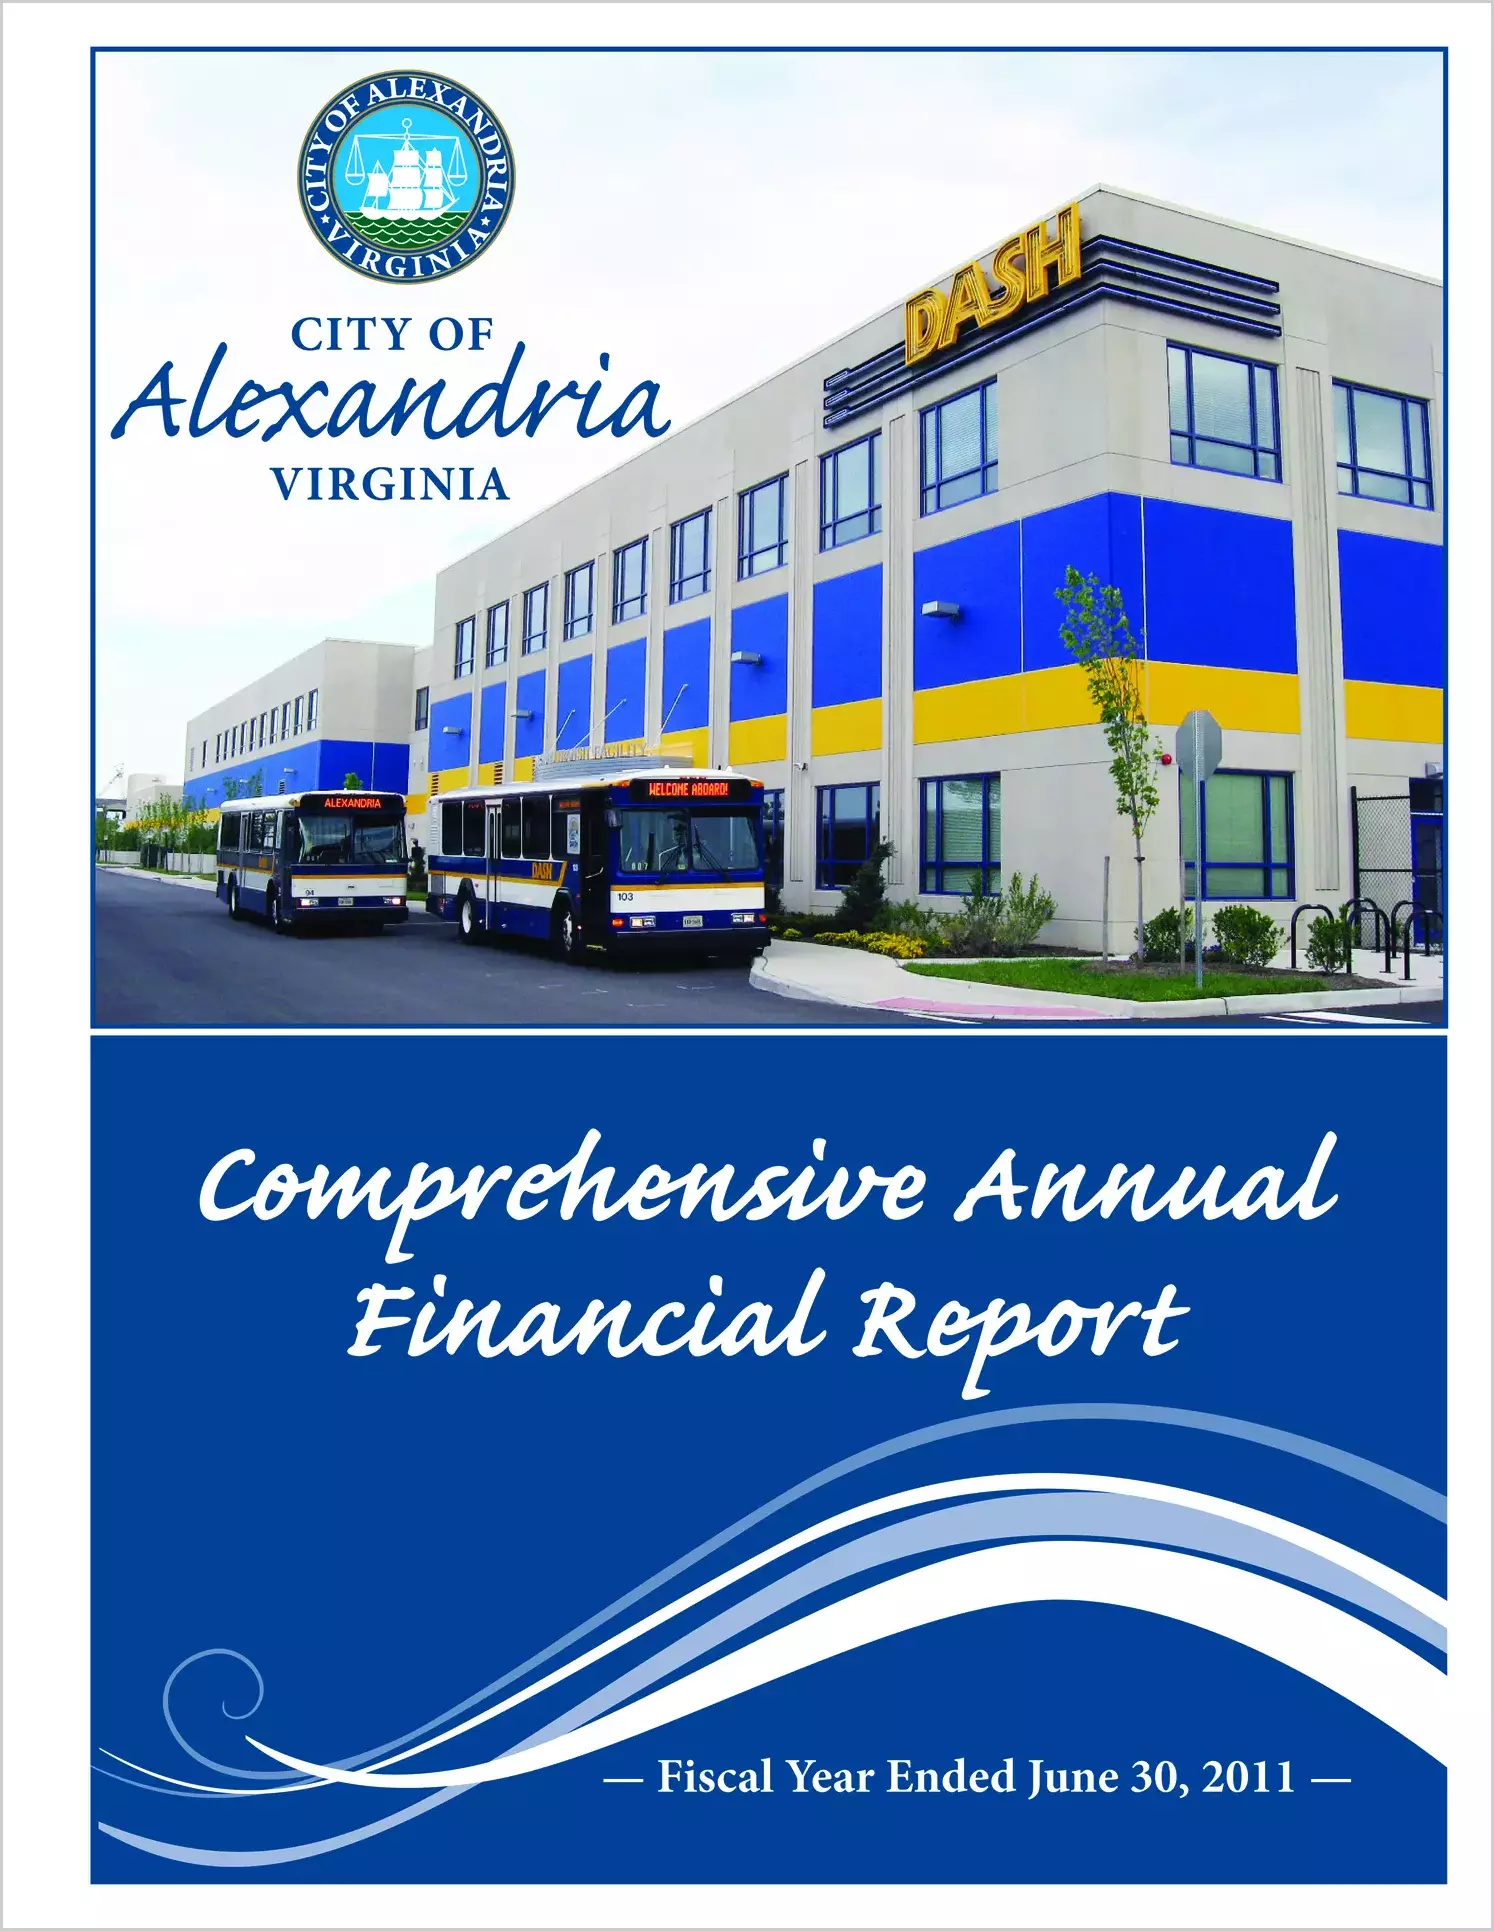 2011 Annual Financial Report for City of Alexandria